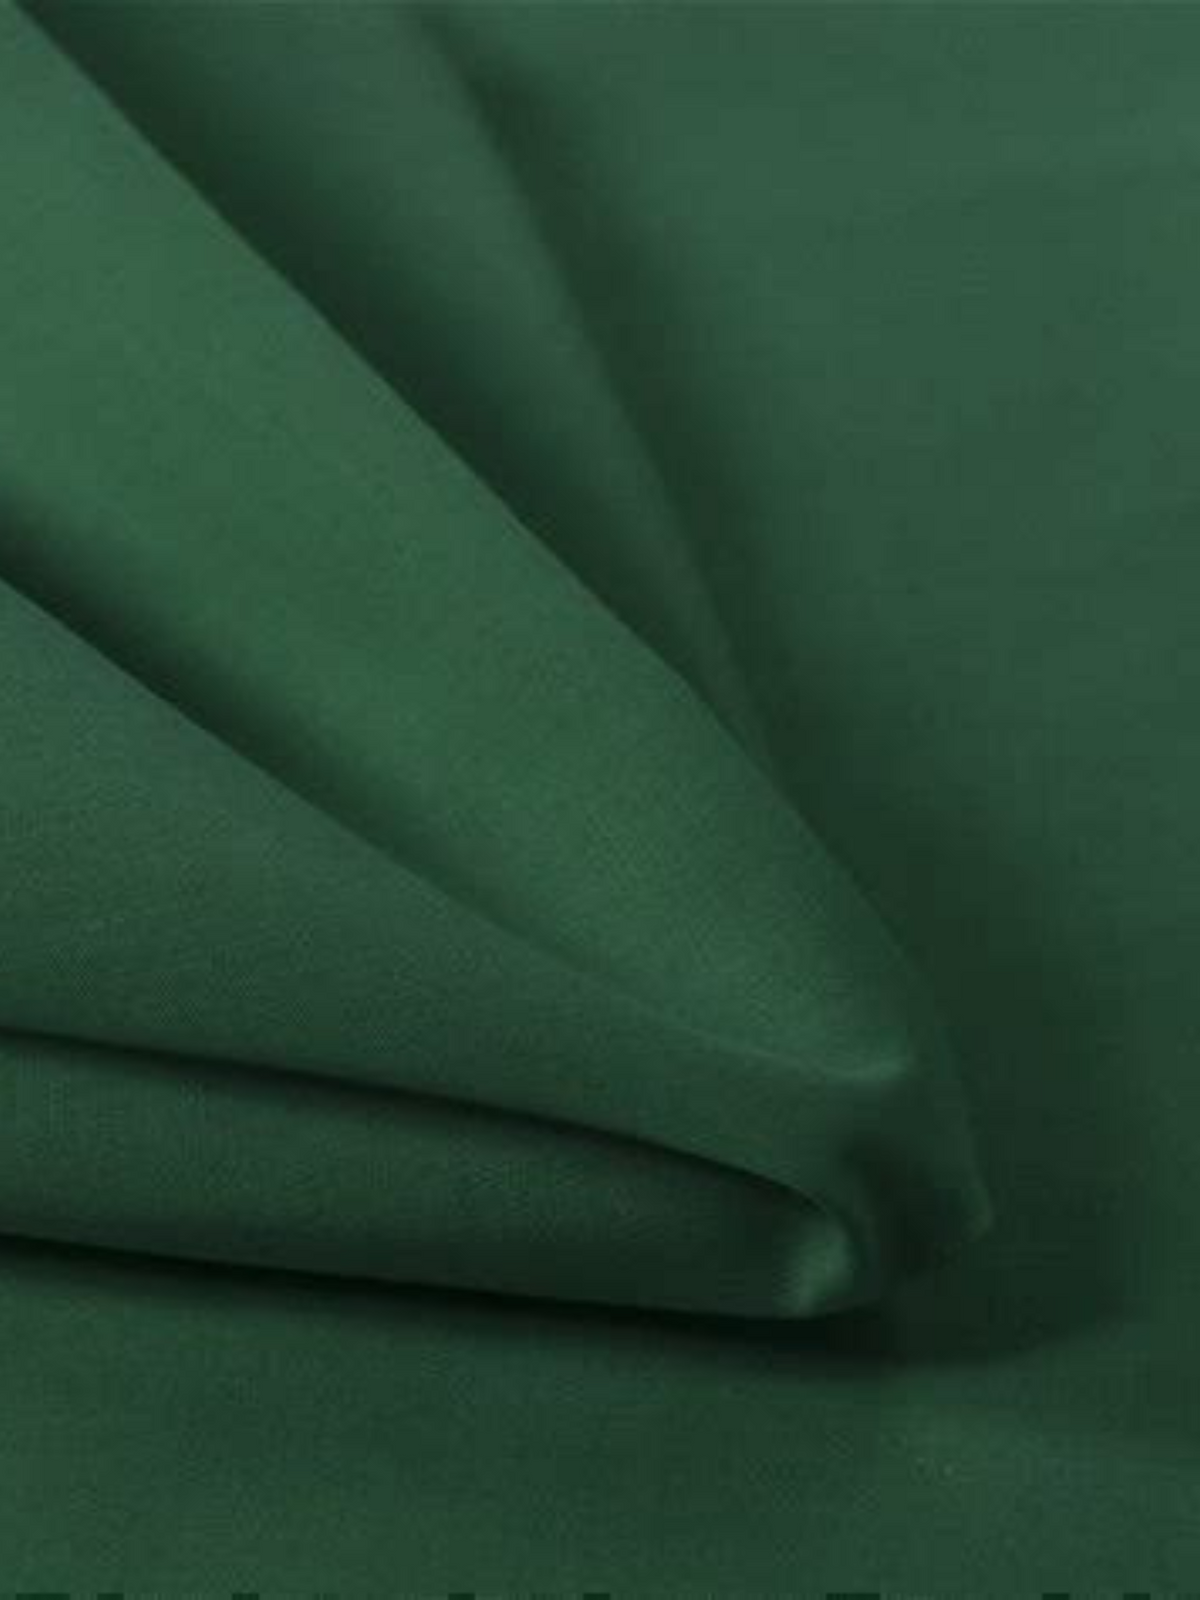 Fitted Sheet - Hunter Green Cotton Sheet : All Bed Sizes - DBC Baby Bedding Co 